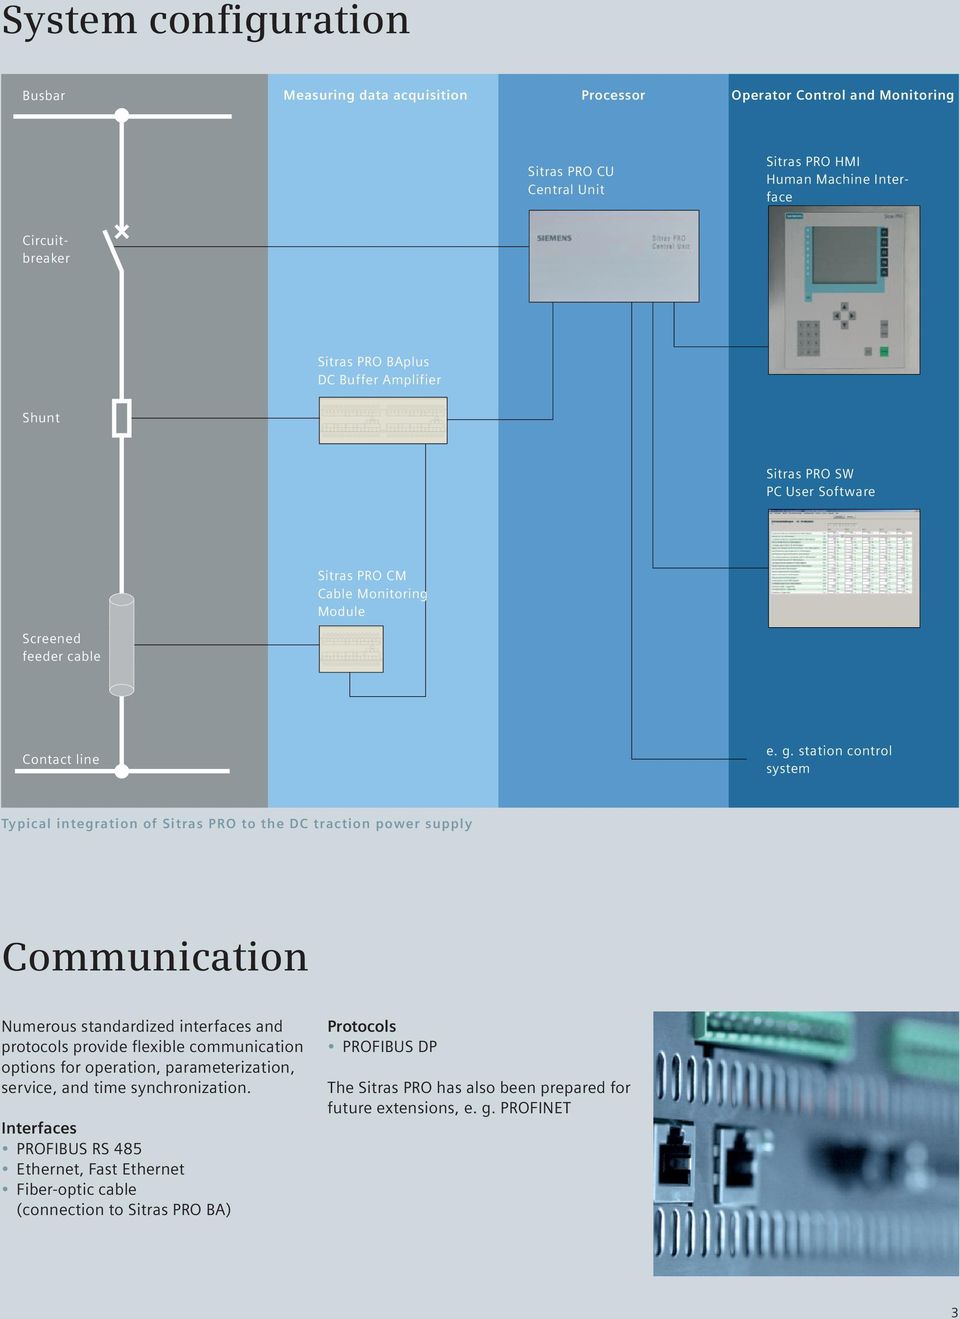 station control system Typical integration of Sitras PRO to the DC traction power supply Communication Numerous standardized interfaces and protocols provide flexible communication options for